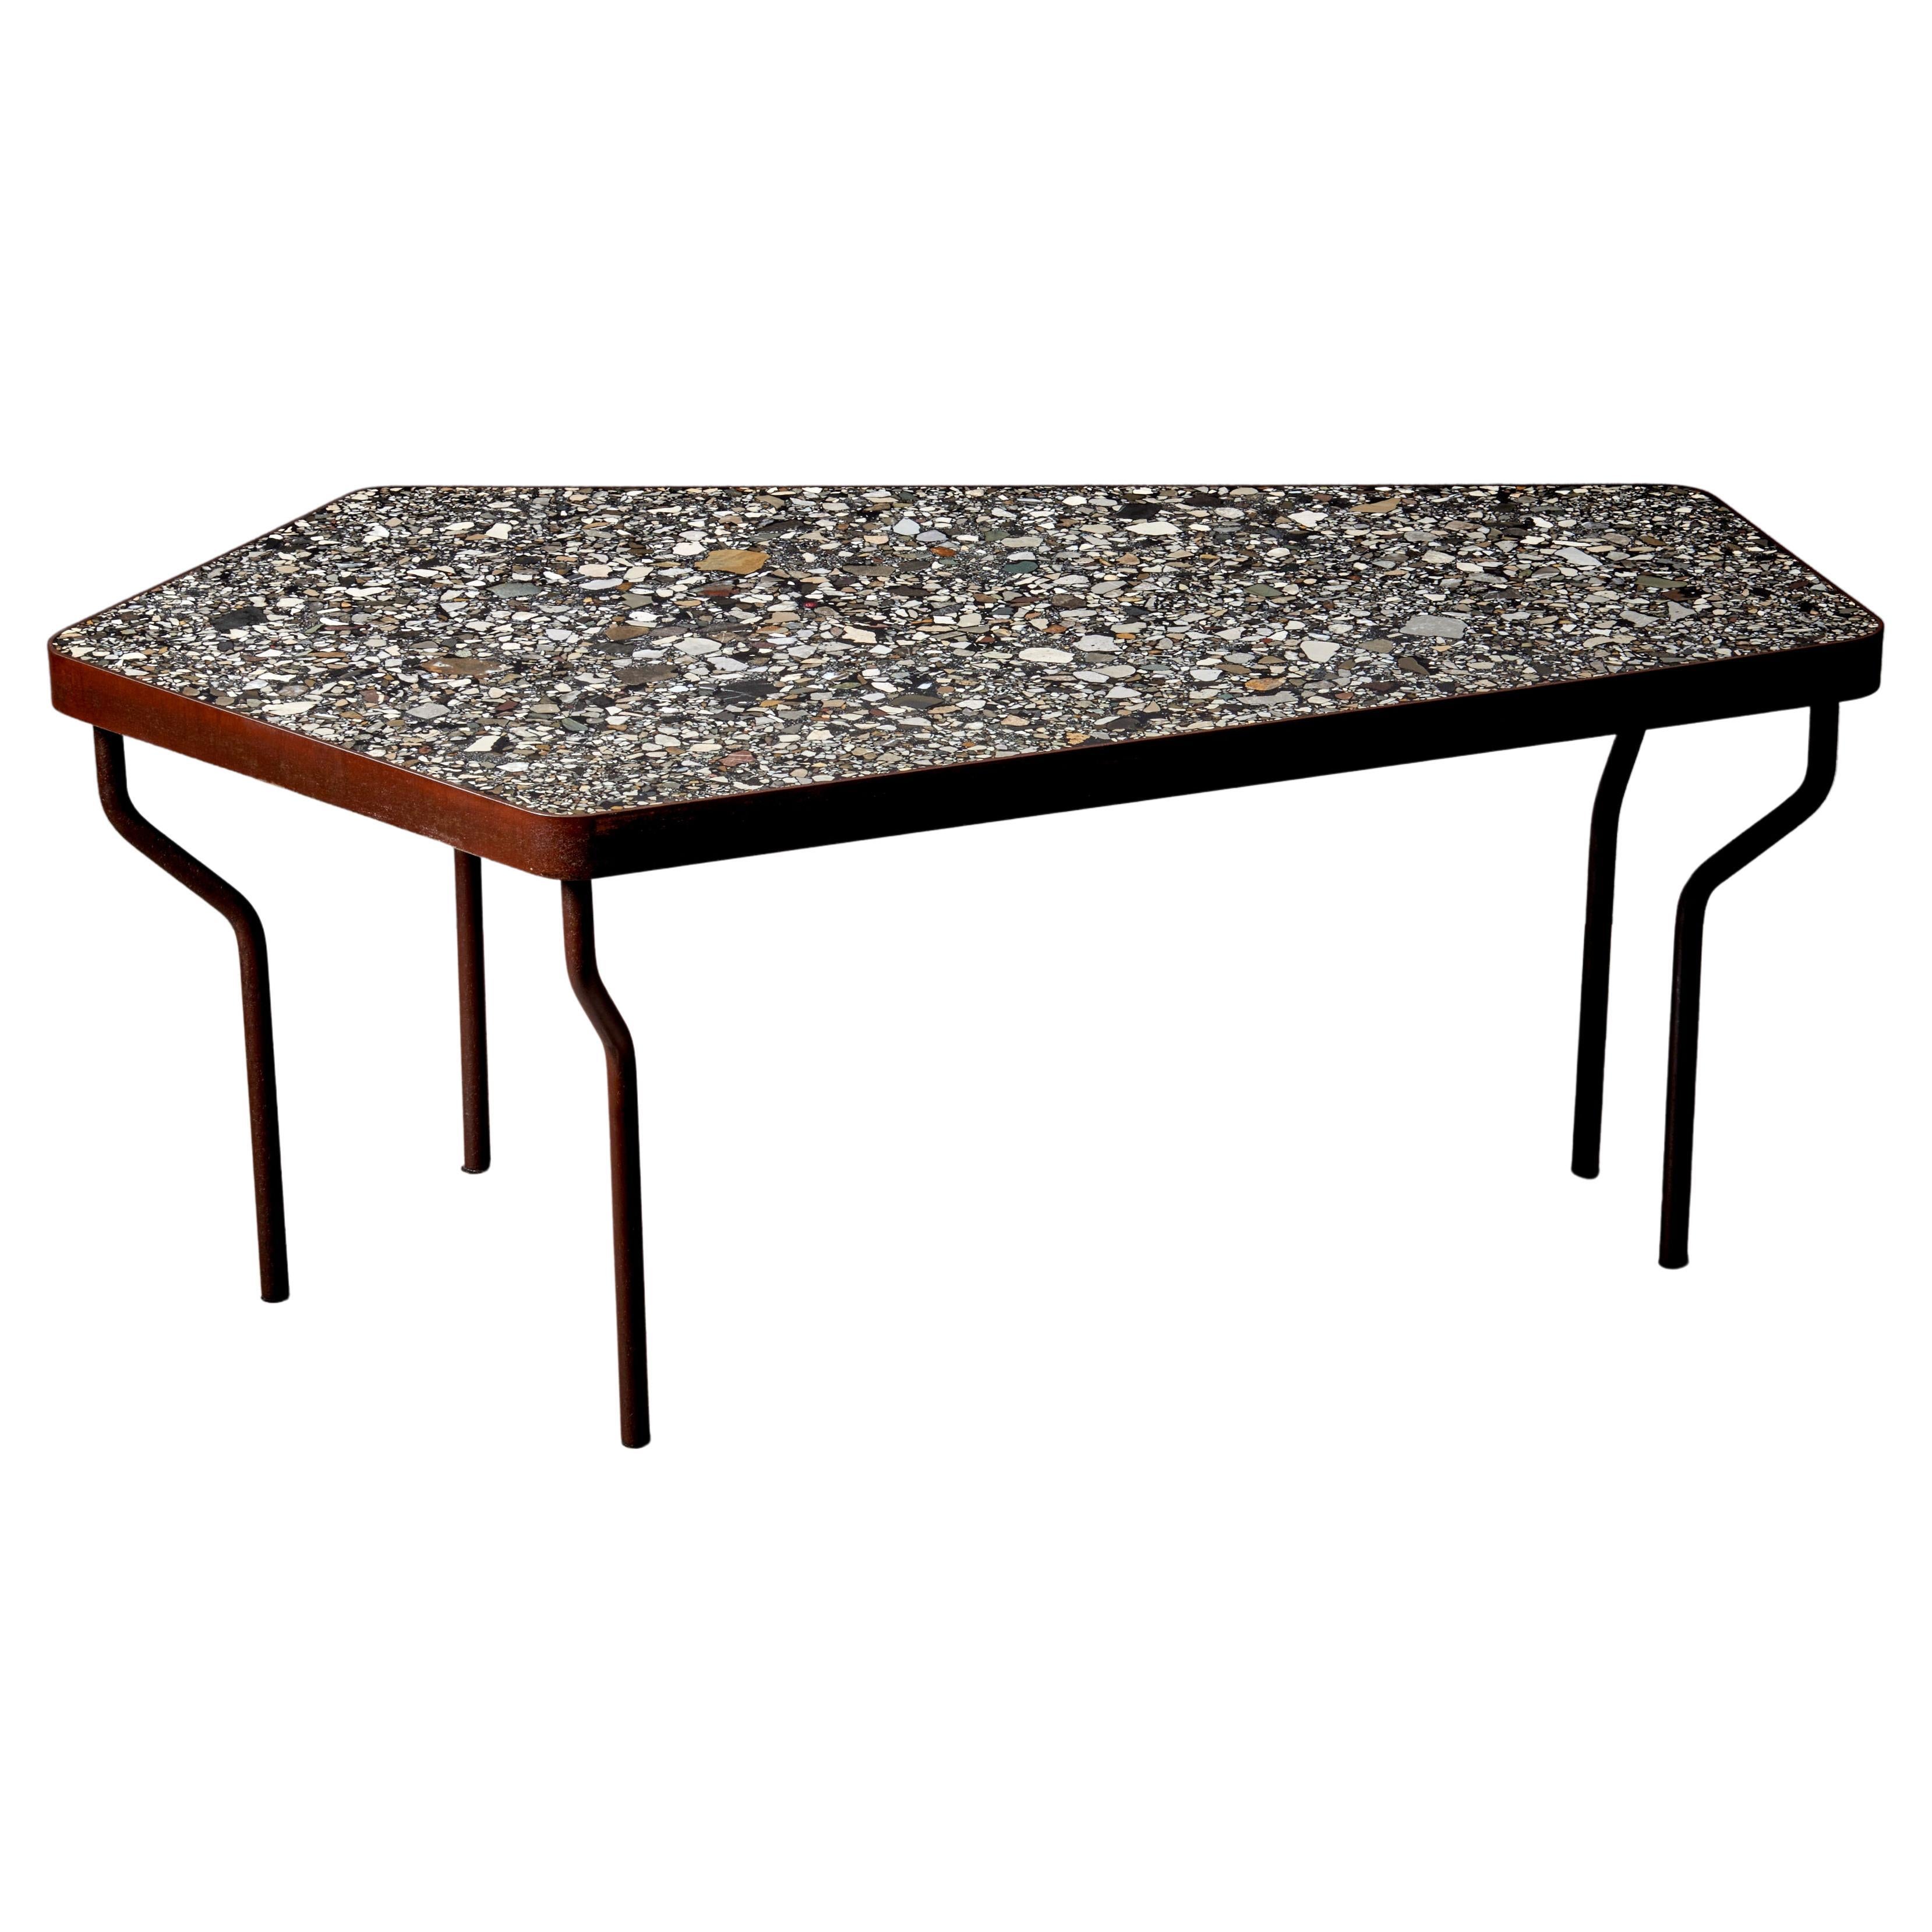 Handcrafted Terrazzo Coffee Table "Prince Beatrice" by Felix Muhrhofer 